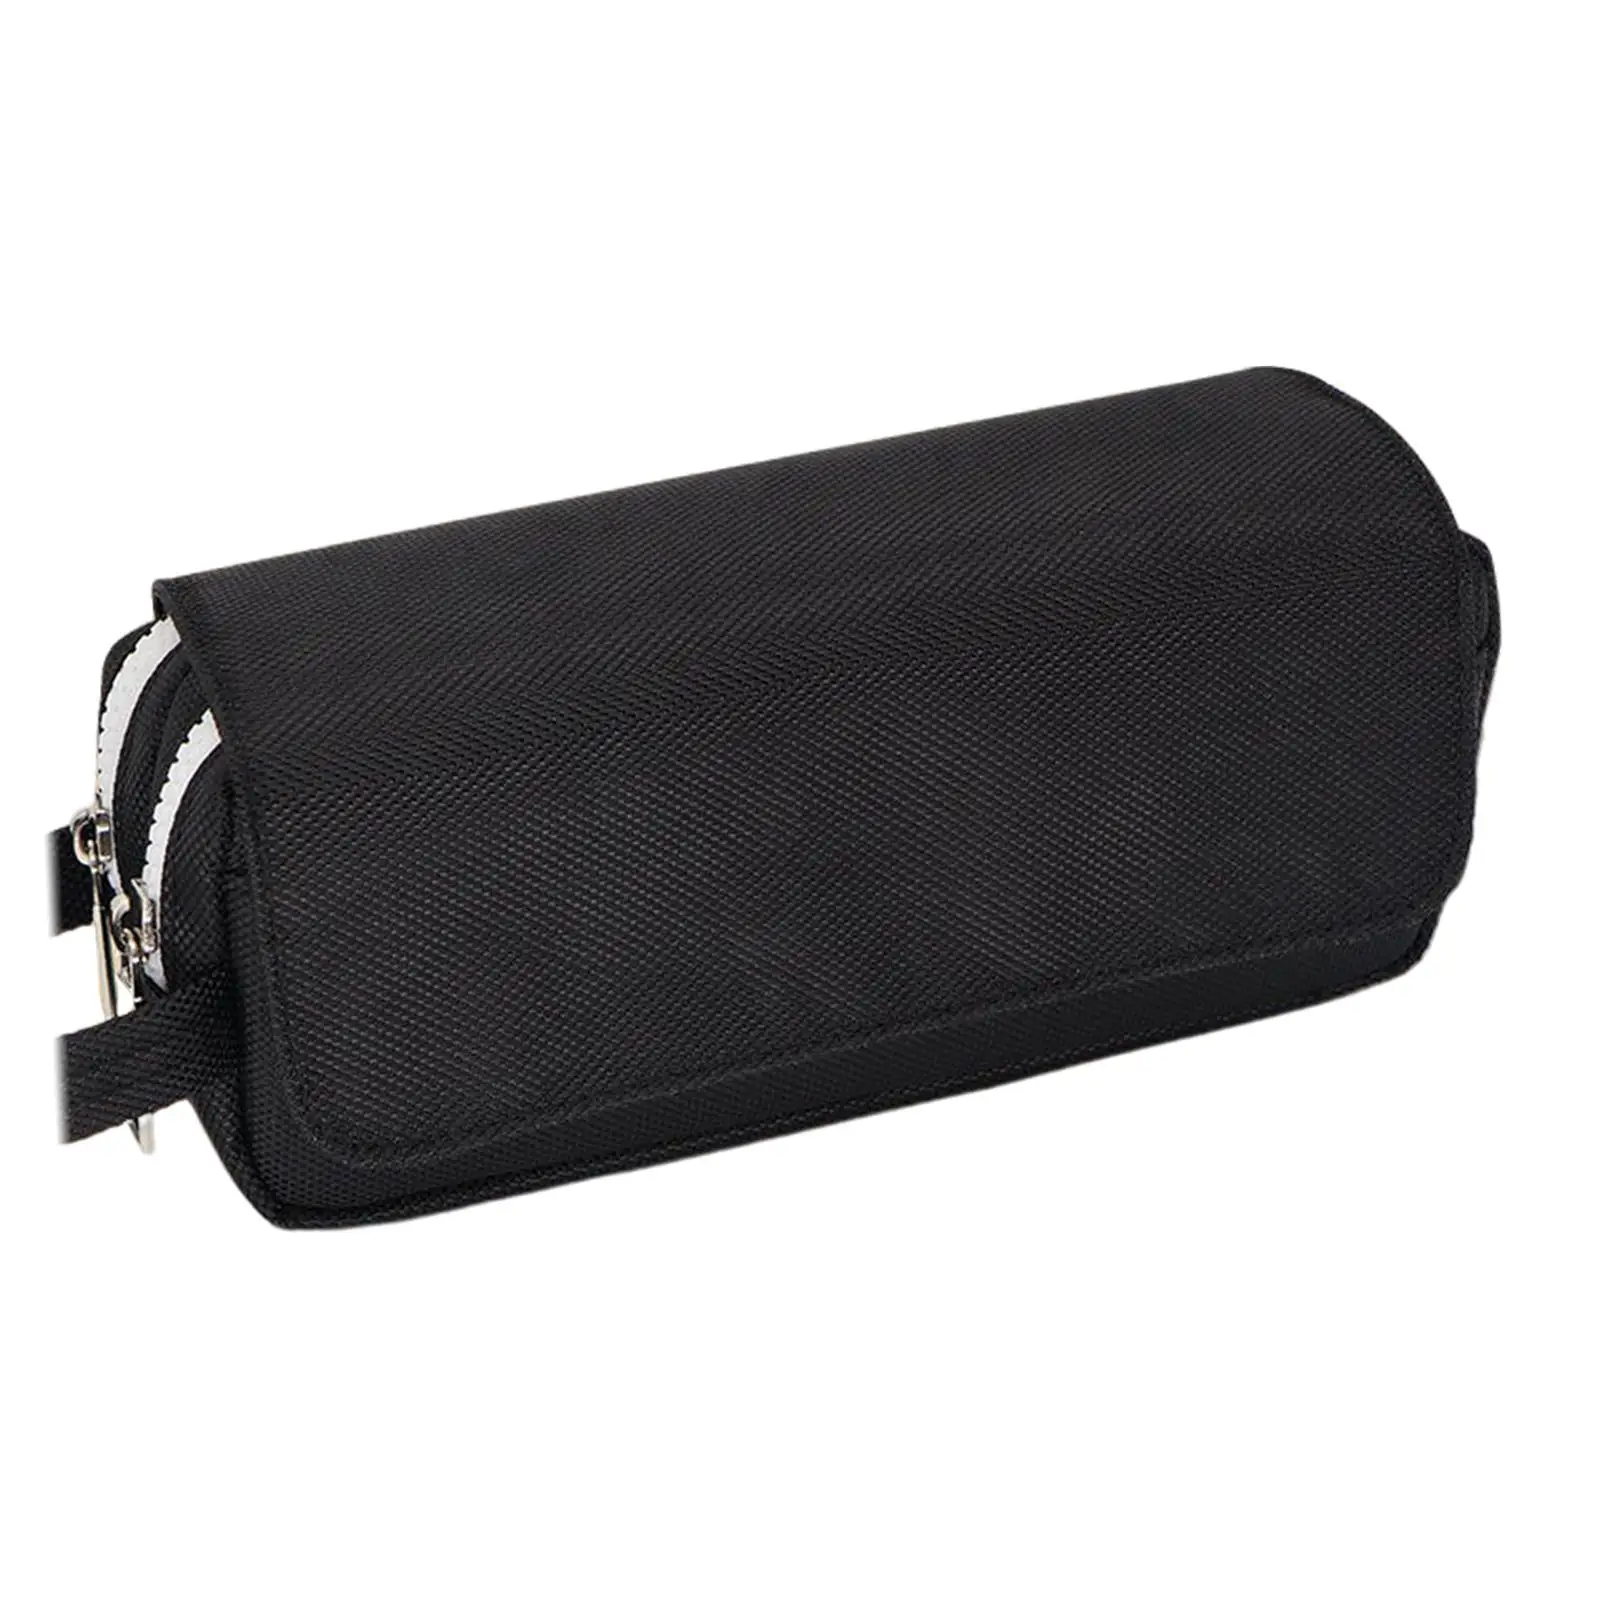 Portable Pencil Pouch Pen Marker Holder Pen Bag Makeup Cosmetic Bags with Handle for School Office Children Boys Girls Teens